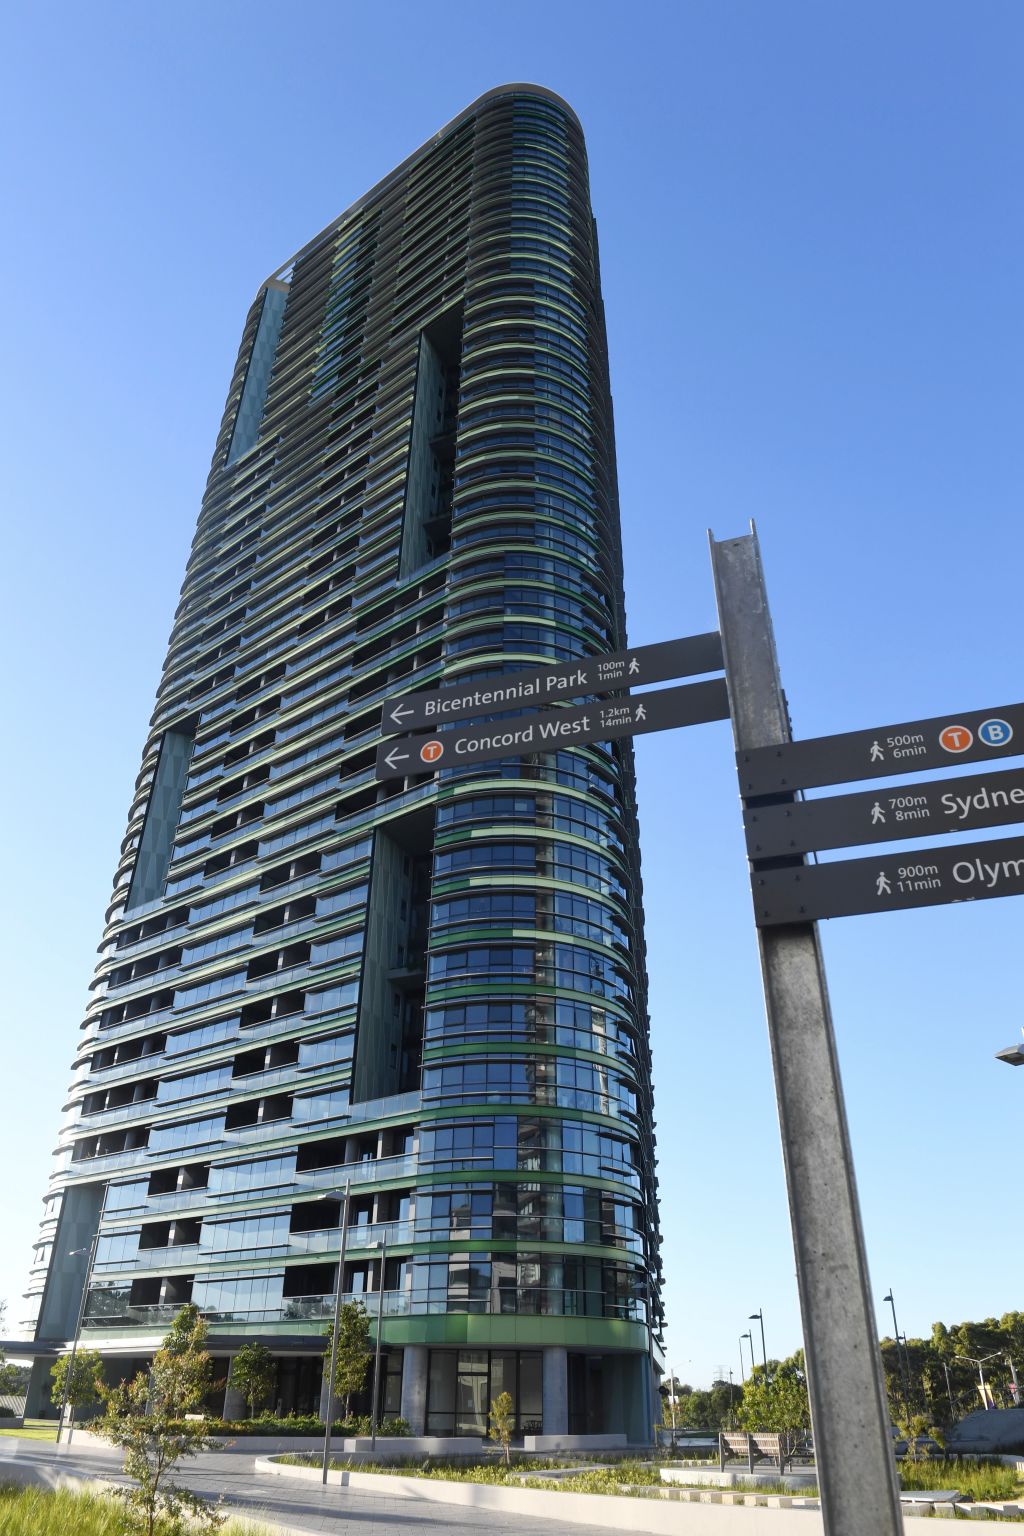 Opal Tower at Sydney Olympic Park, which was evacuated after cracking occurred on supporting walls. Photo: Nick Moir